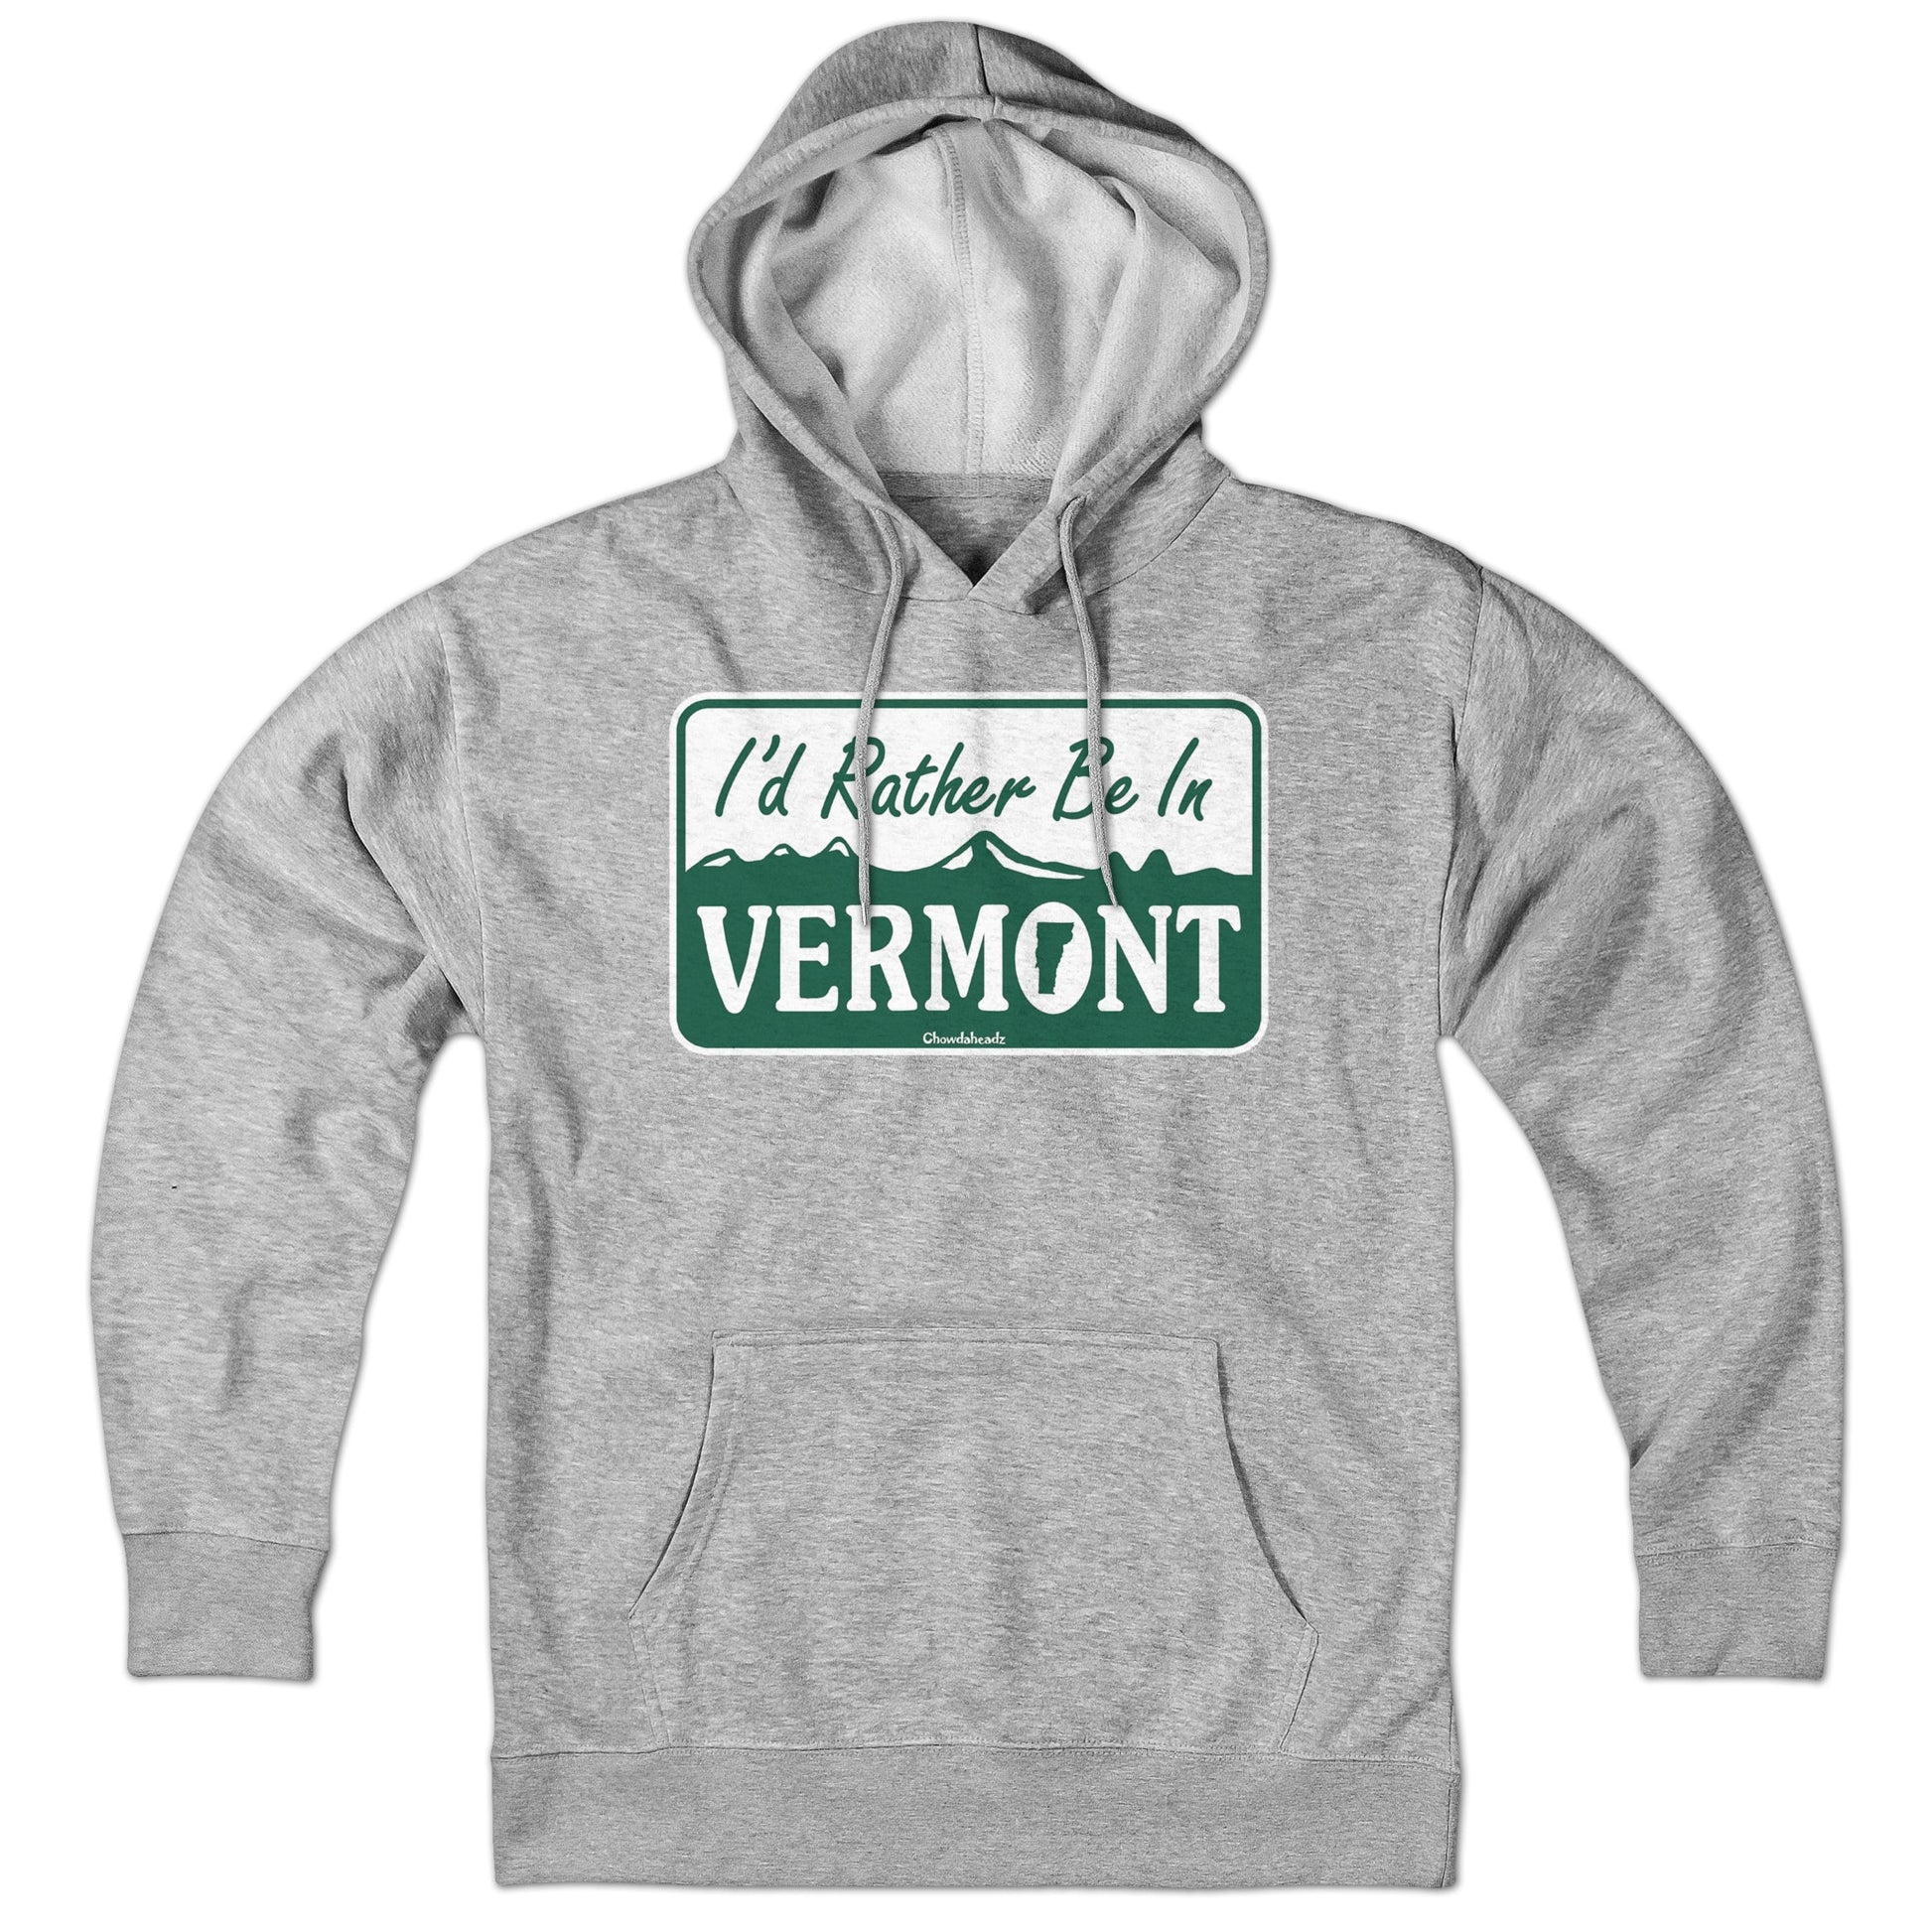 I'd Rather Be In Vermont Sign Hoodie - Chowdaheadz